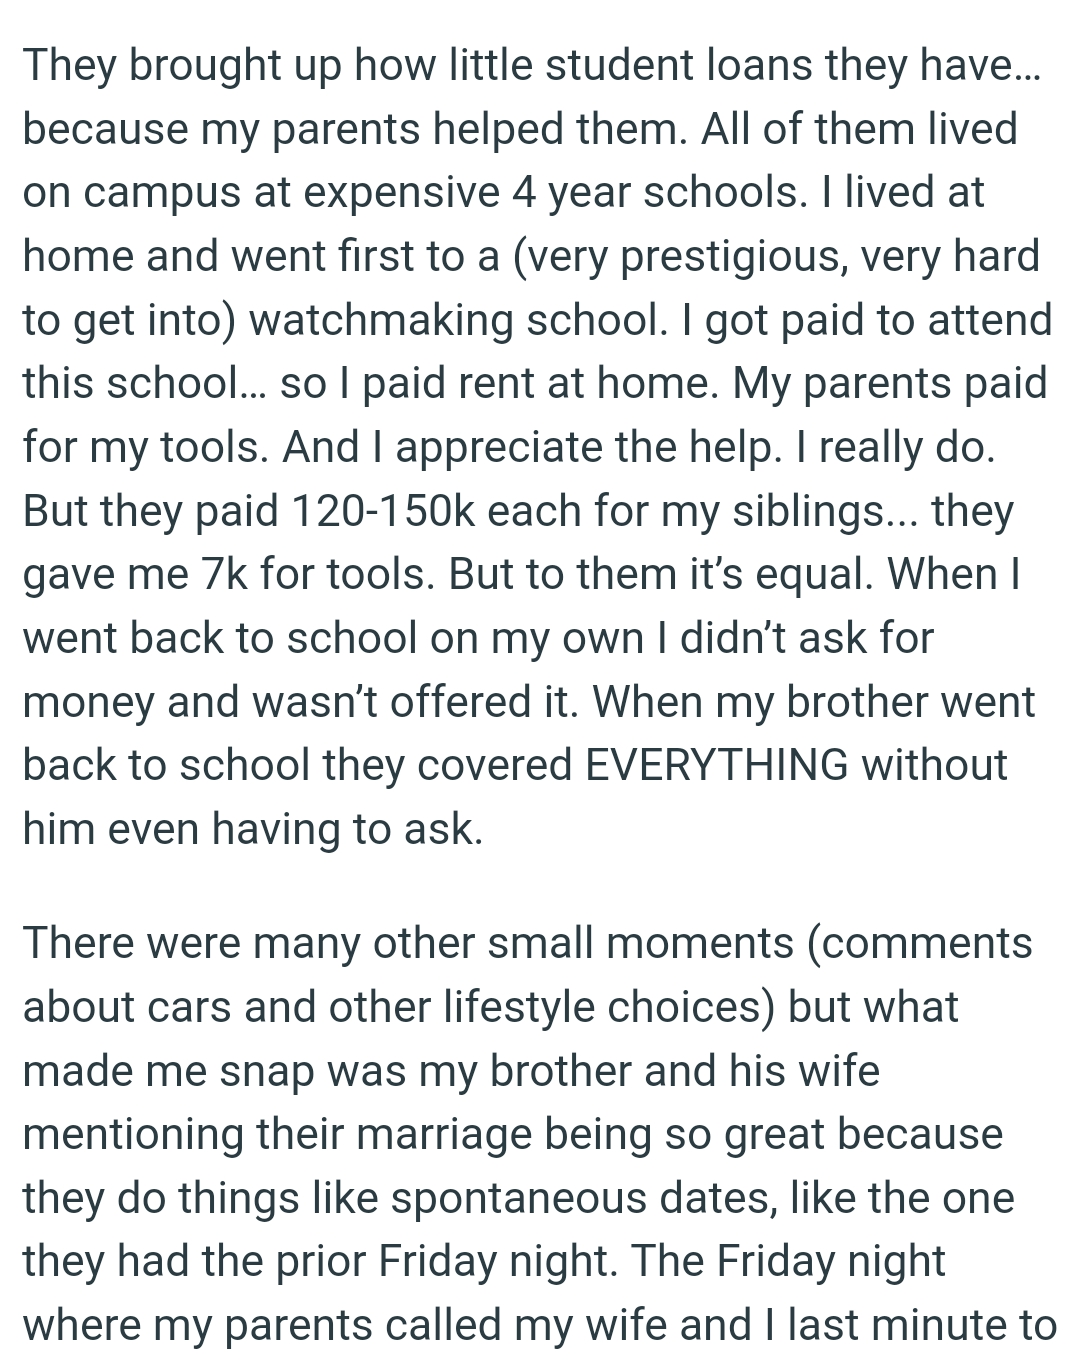 When OP's brother went back to school, his parents paid for everything